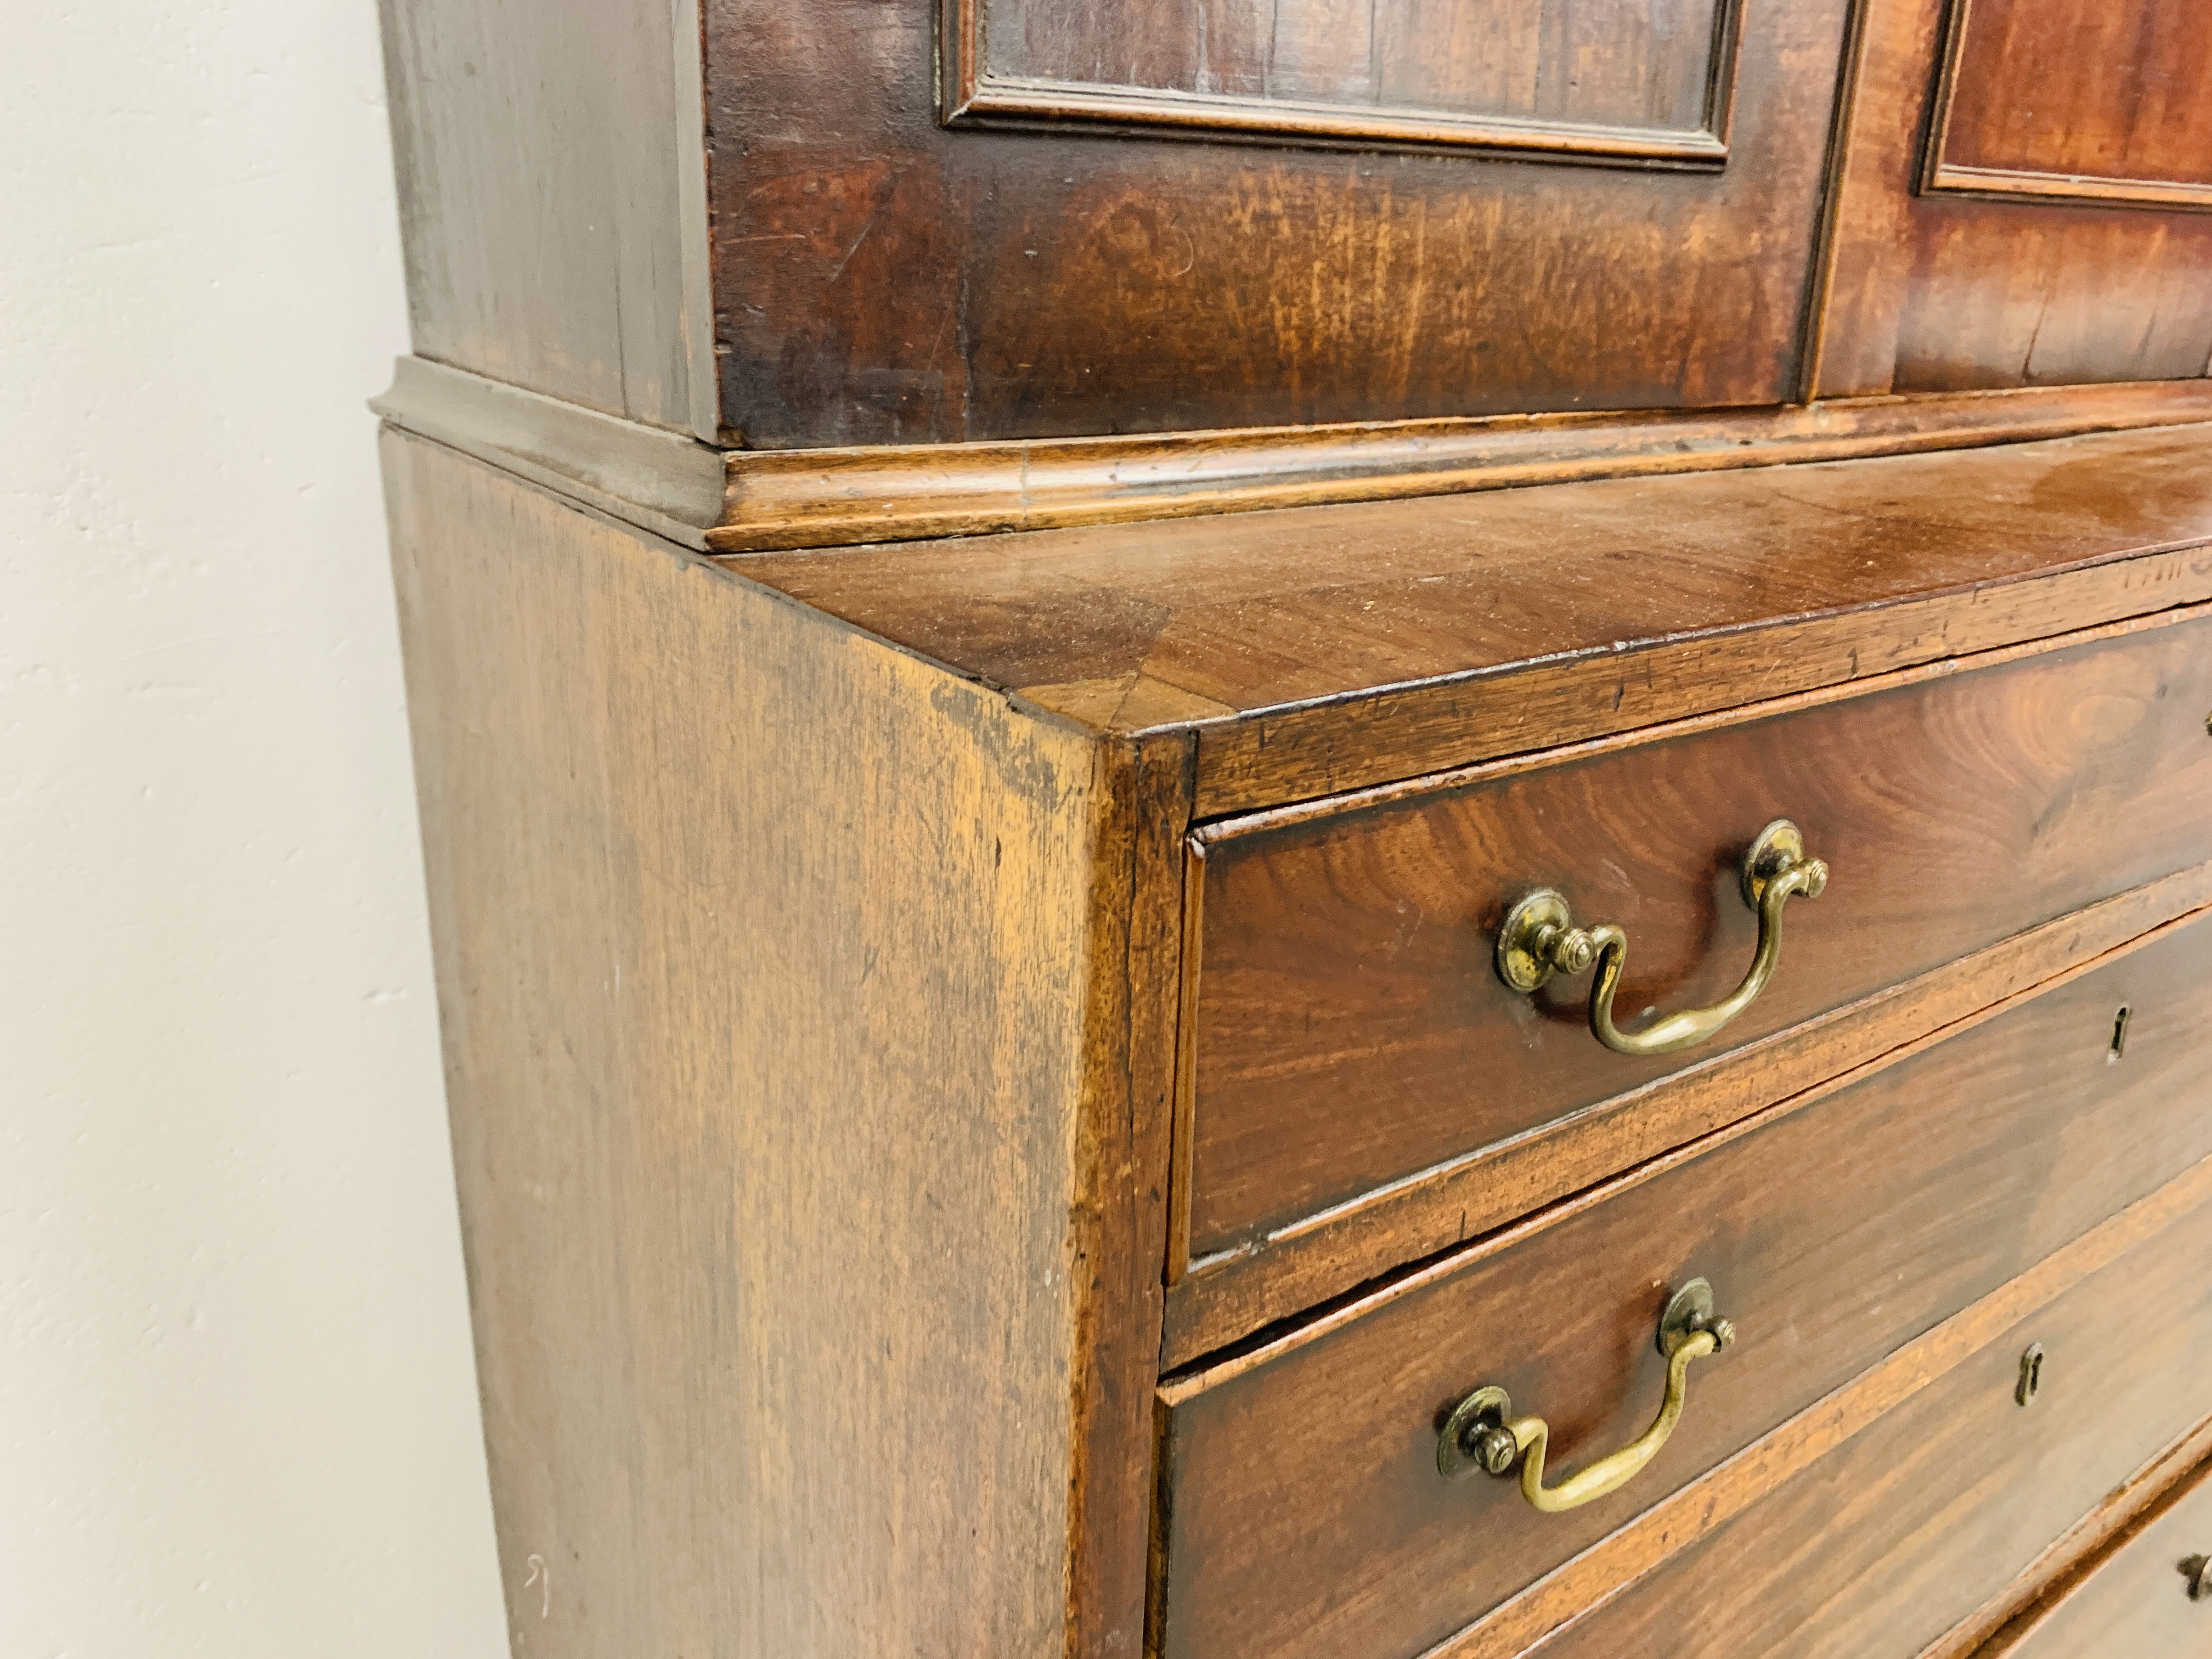 A GEORGE III MAHOGANY CHEST OF FOUR DRAWERS WITH ASSOCIATED TWO DOOR CUPBOARD ABOVE, WIDTH 97CM. - Image 7 of 17